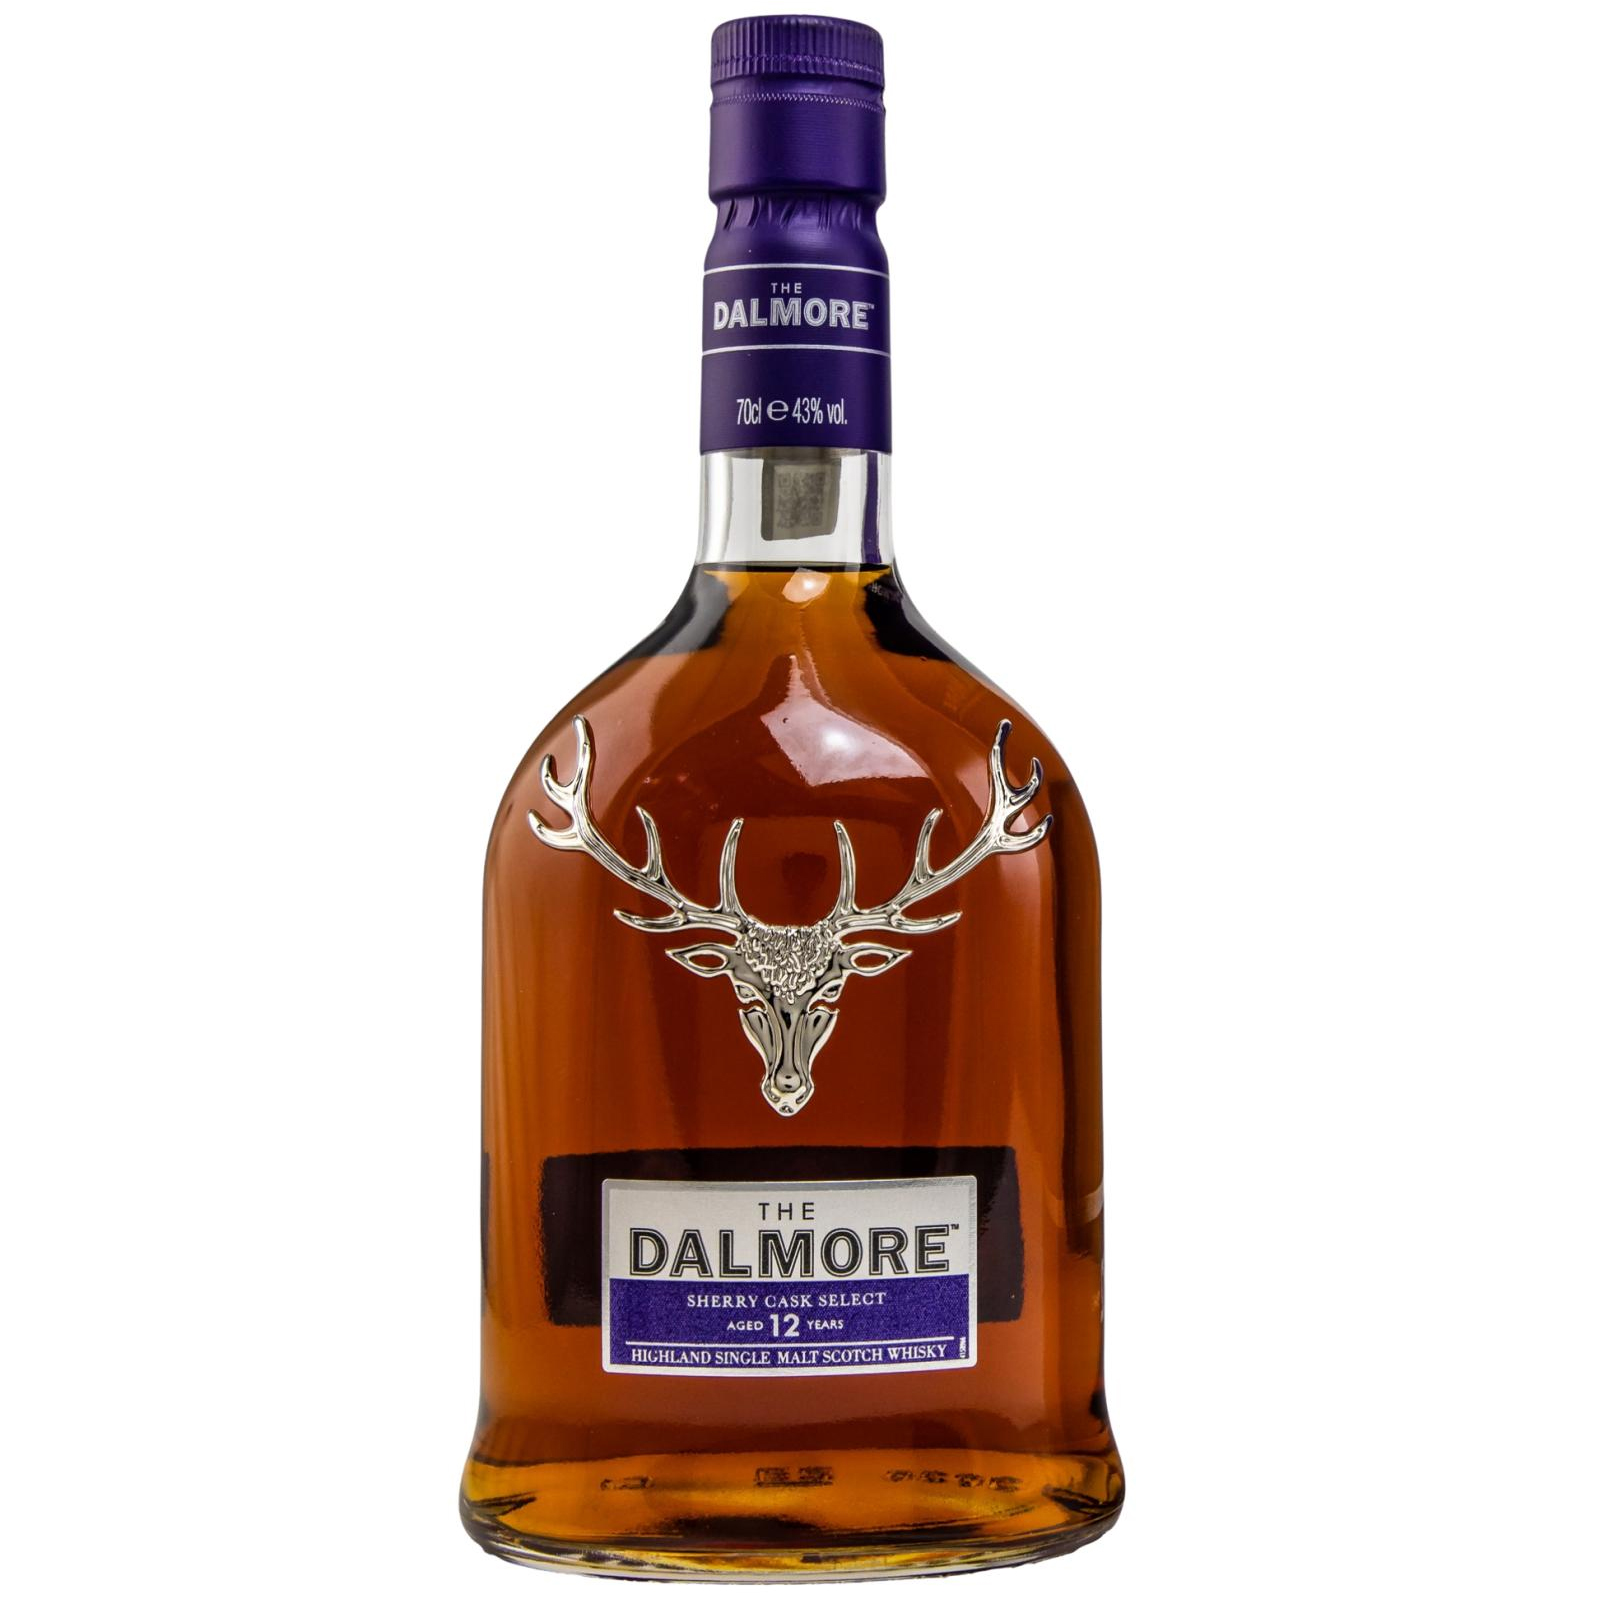 You are currently viewing Dalmore 12 years – Sherry Cask Select